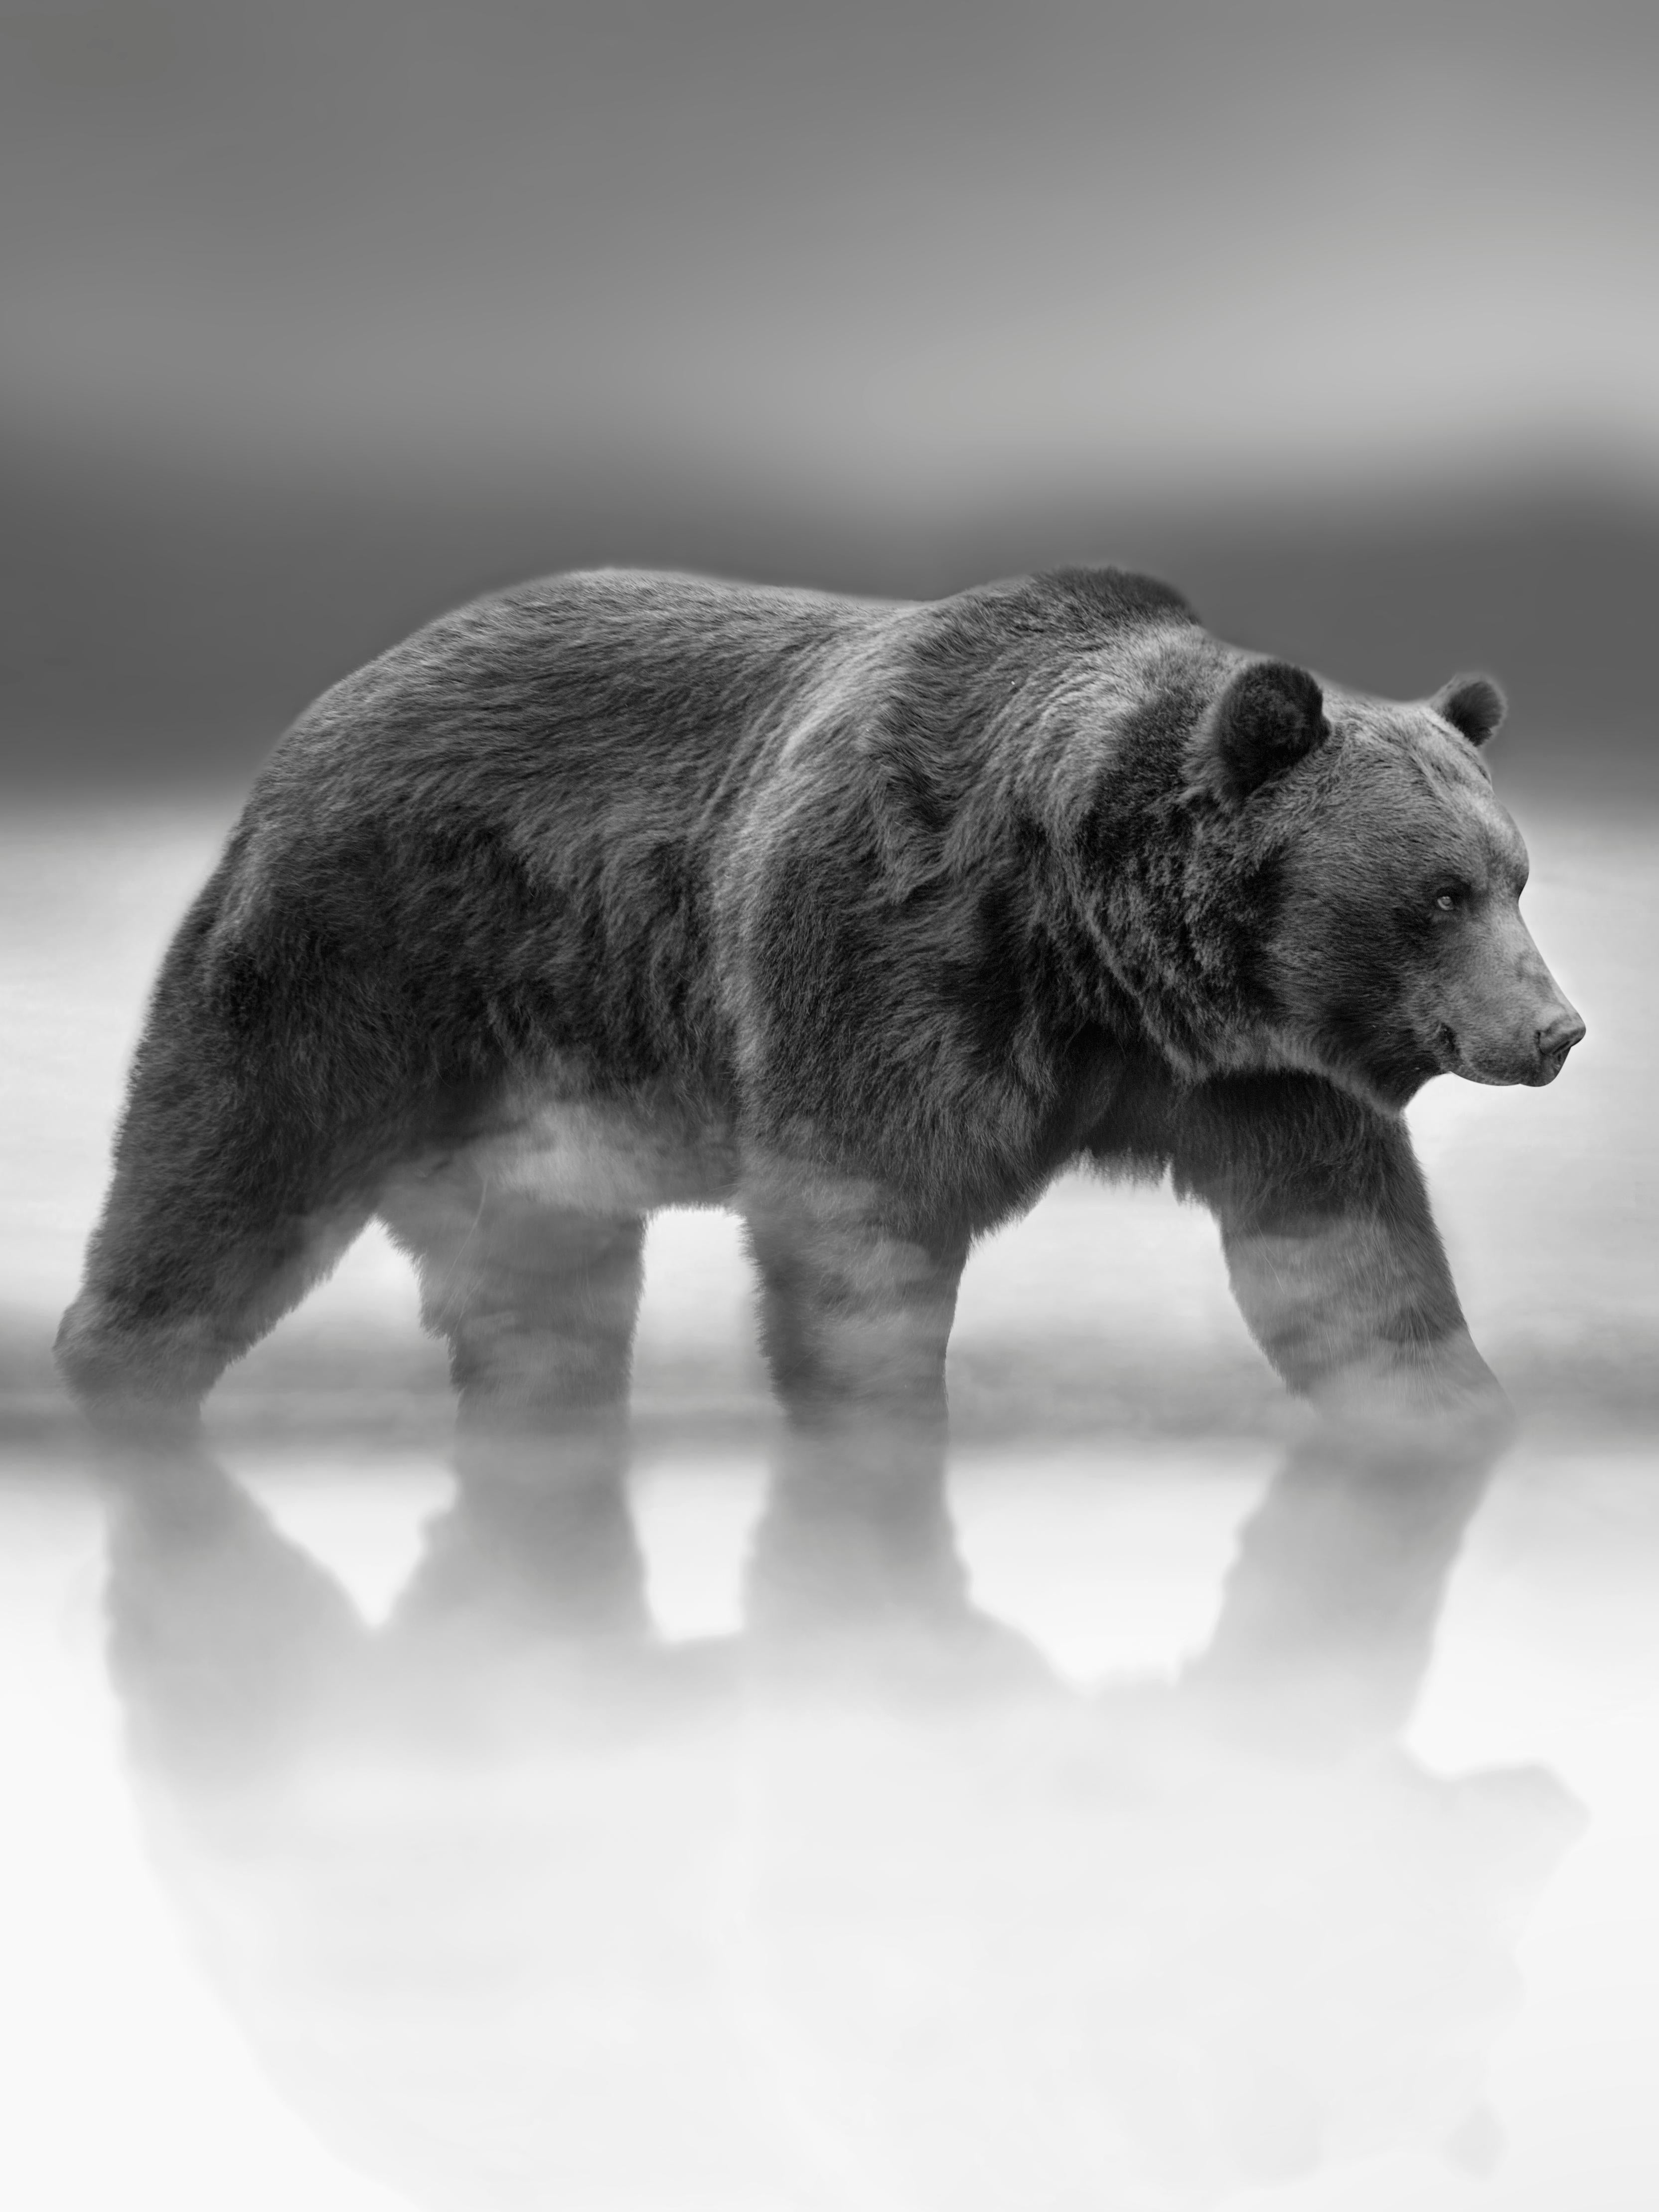 Shane Russeck Black and White Photograph - Kodiak Island -  50x60 Black & White Photography, Kodiak Bear Grizzly Bear 